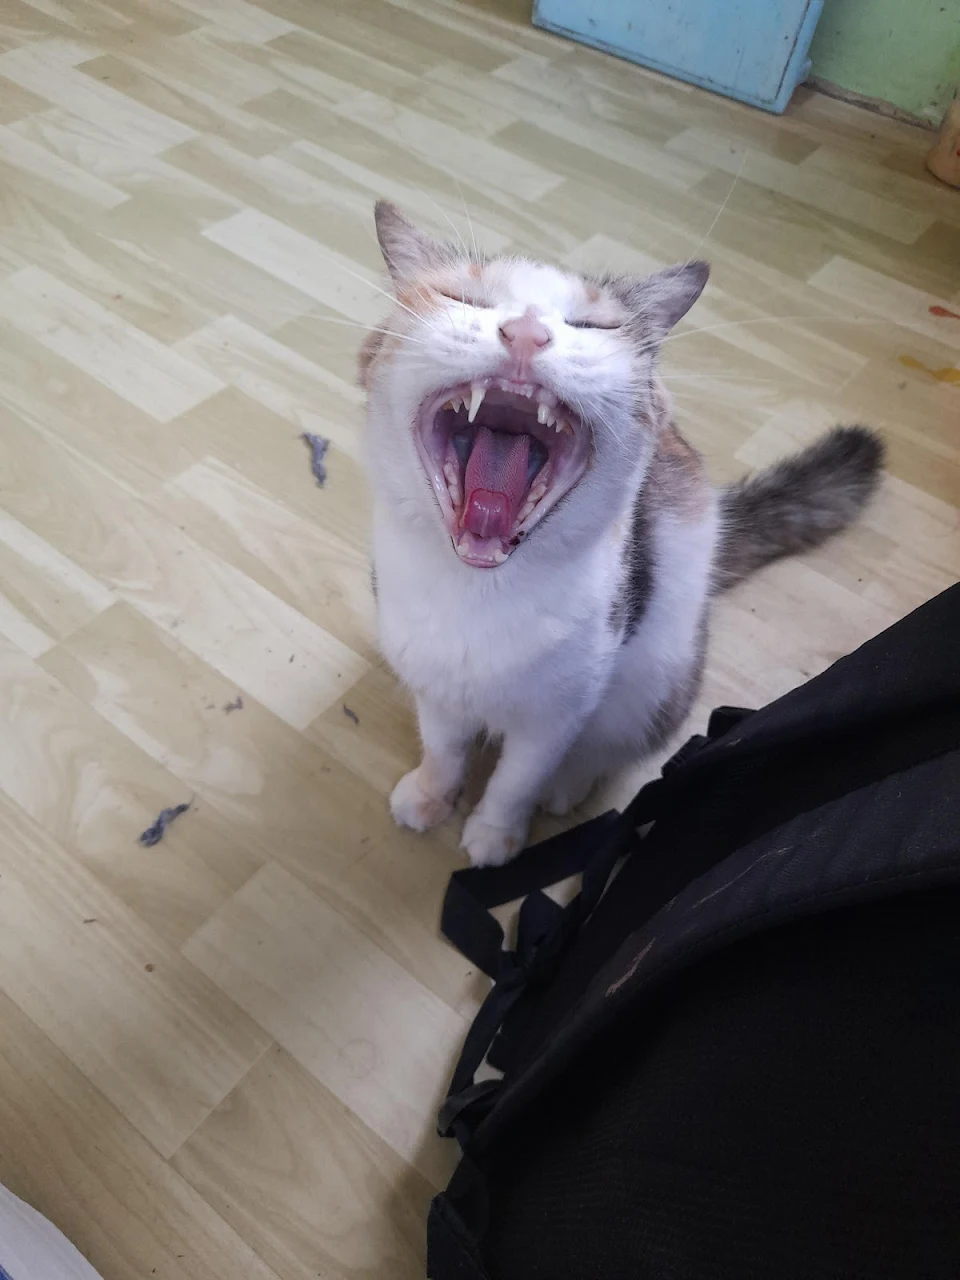 A cat in the middle of yawning